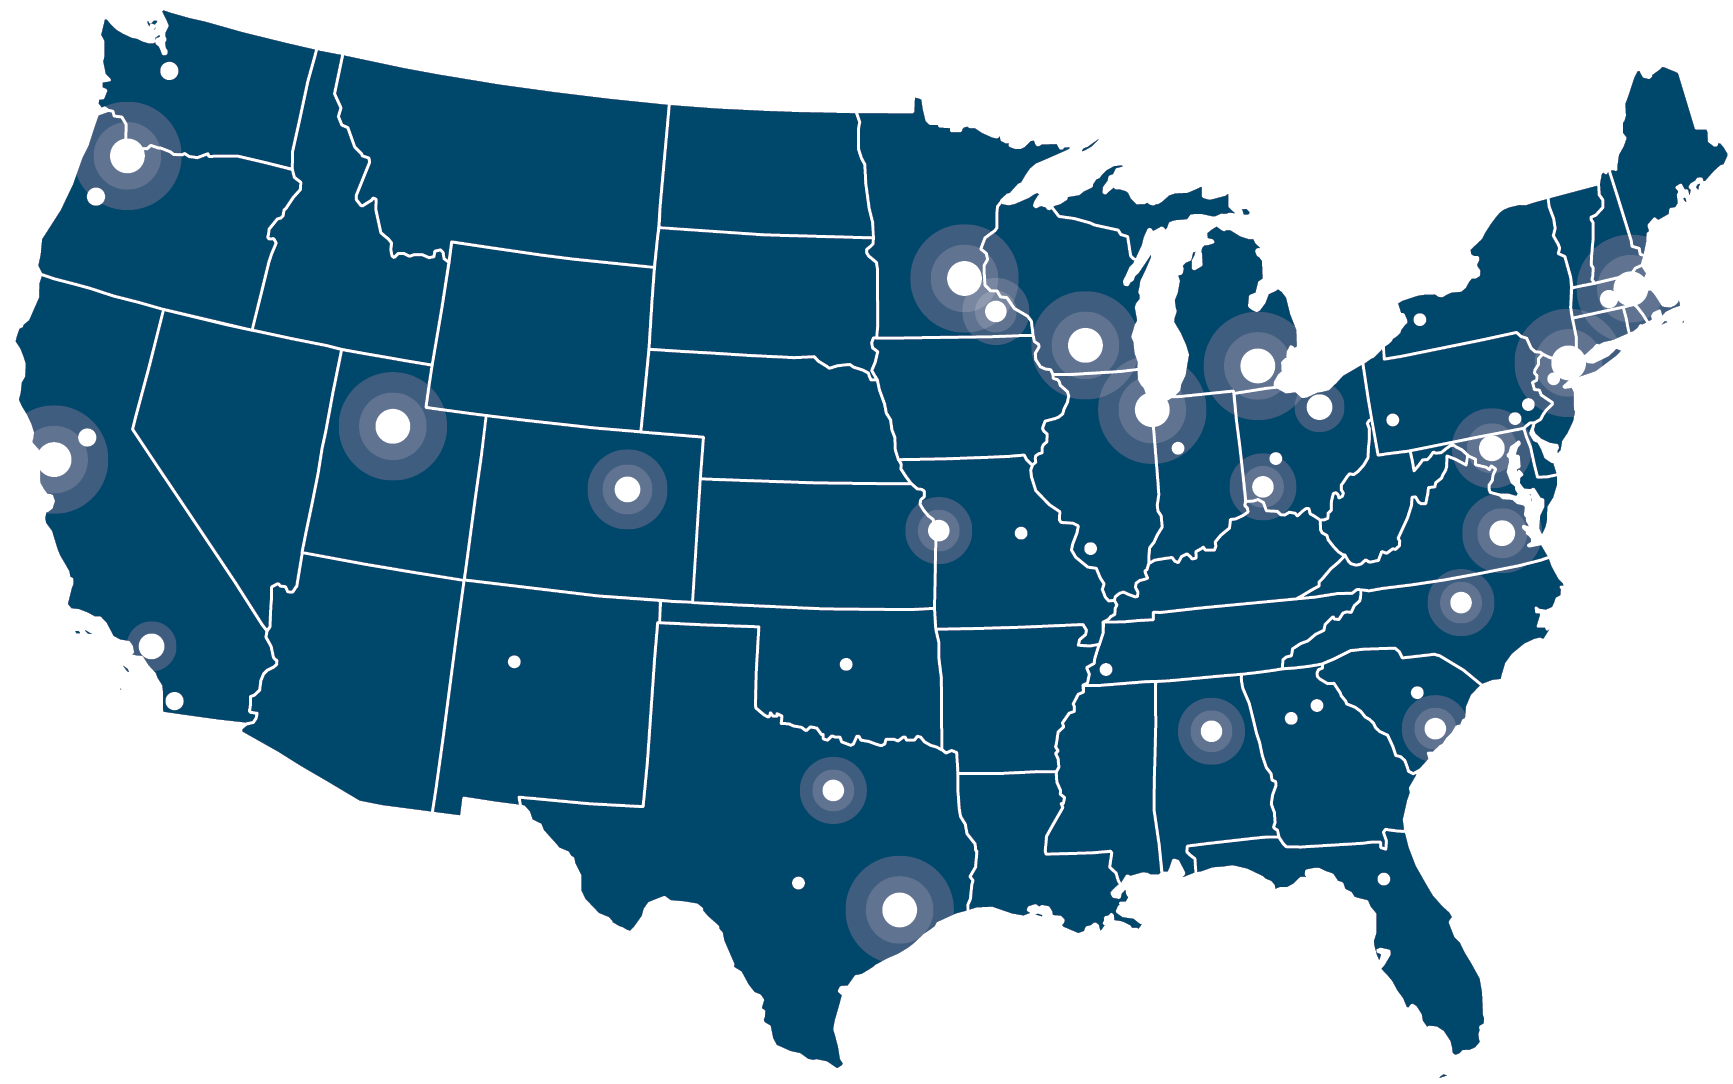 This map shows where the AHRQ primary care grants are distributed around the United States. The map shows larger dots, which indicate a larger number of grants, in cities along the eastern coast such as Boston, New York, and Washington D.C.; in the northern Midwest, such as Chicago, Ann Arbor, Madison, and Minneapolis; and in a few other places across the country including Atlanta, Houston, Dallas, Kansas City, Denver, Salt Lake City, Portland, and the Bay Area in CA.